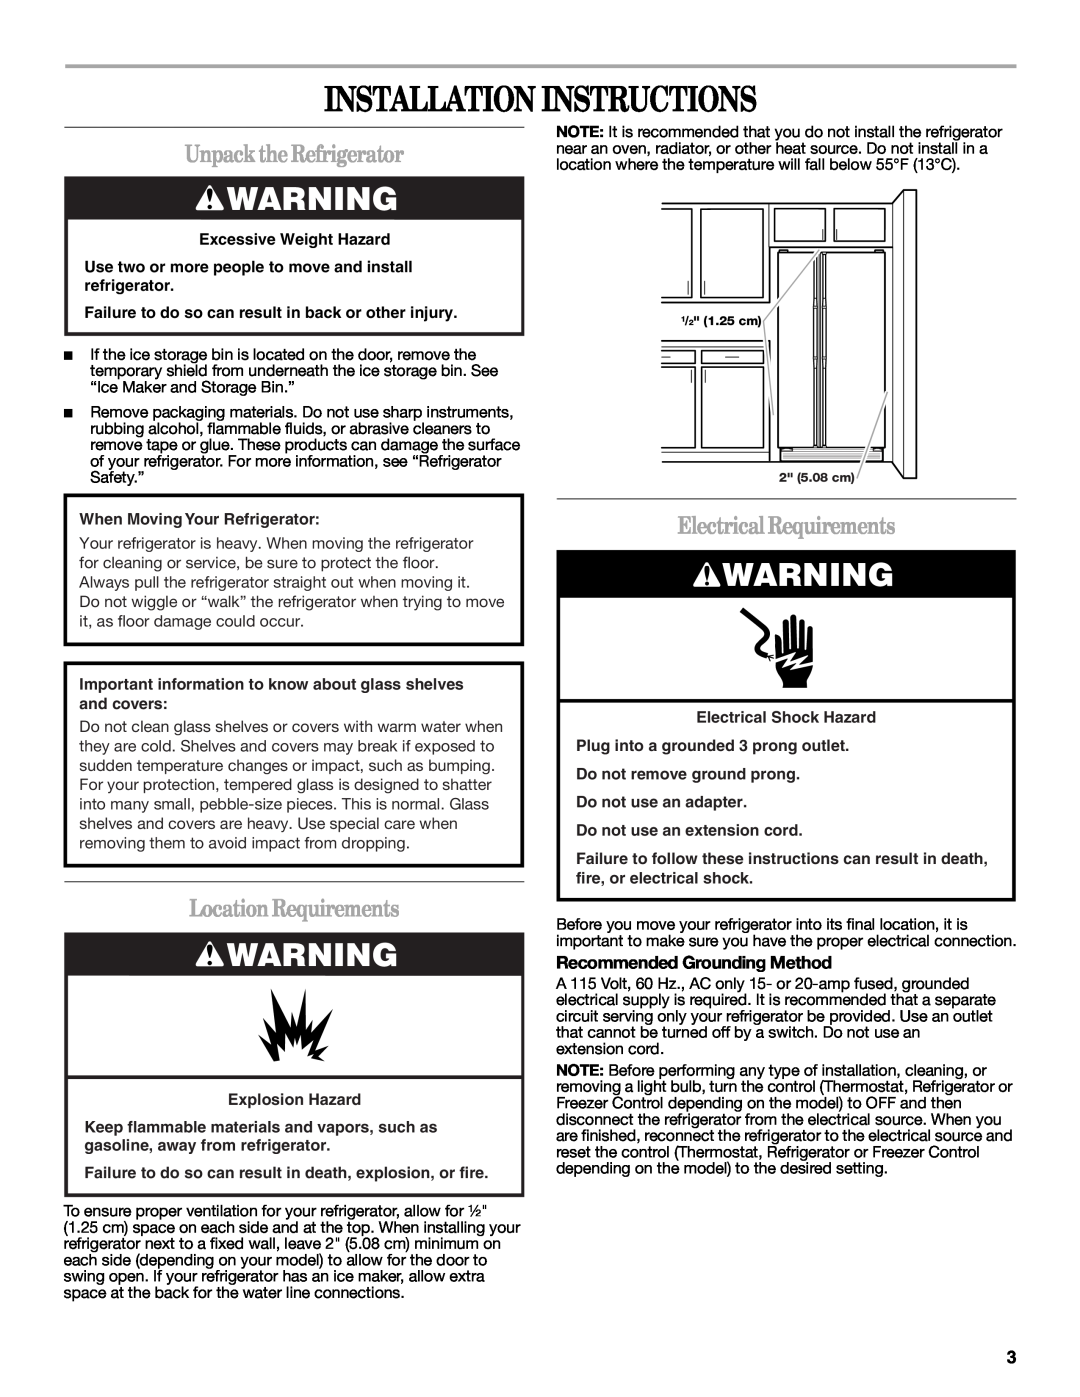 Whirlpool GD5NHAXSB00 Installation Instructions, UnpacktheRefrigerator, LocationRequirements, Electrical Requirements 